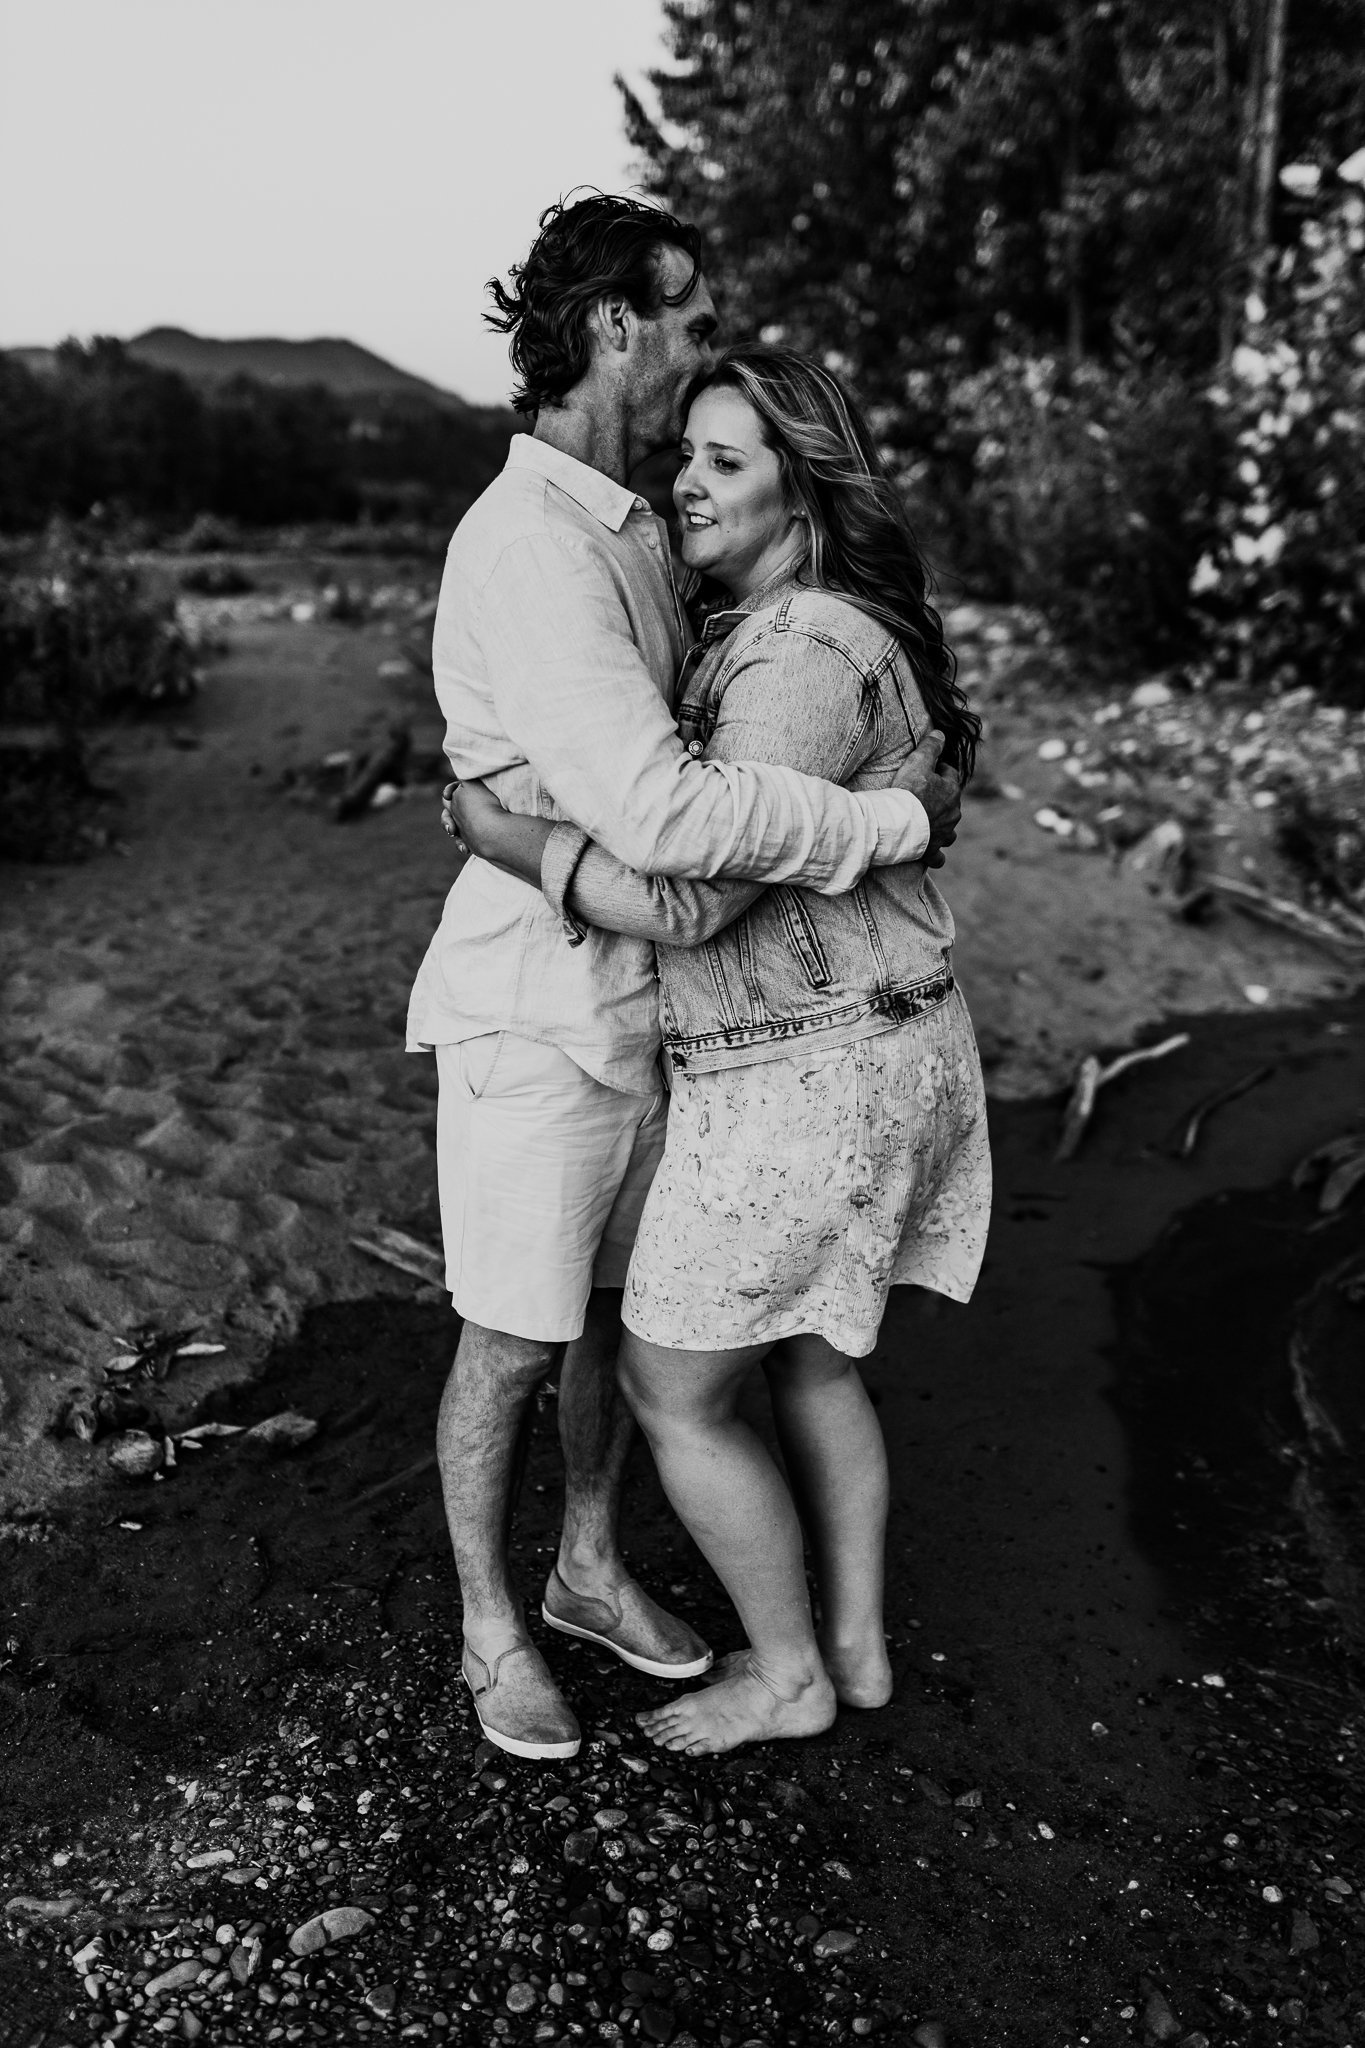 Vedder+River+Family+Session+-+Anna+Hurley+Photography++(51).jpg